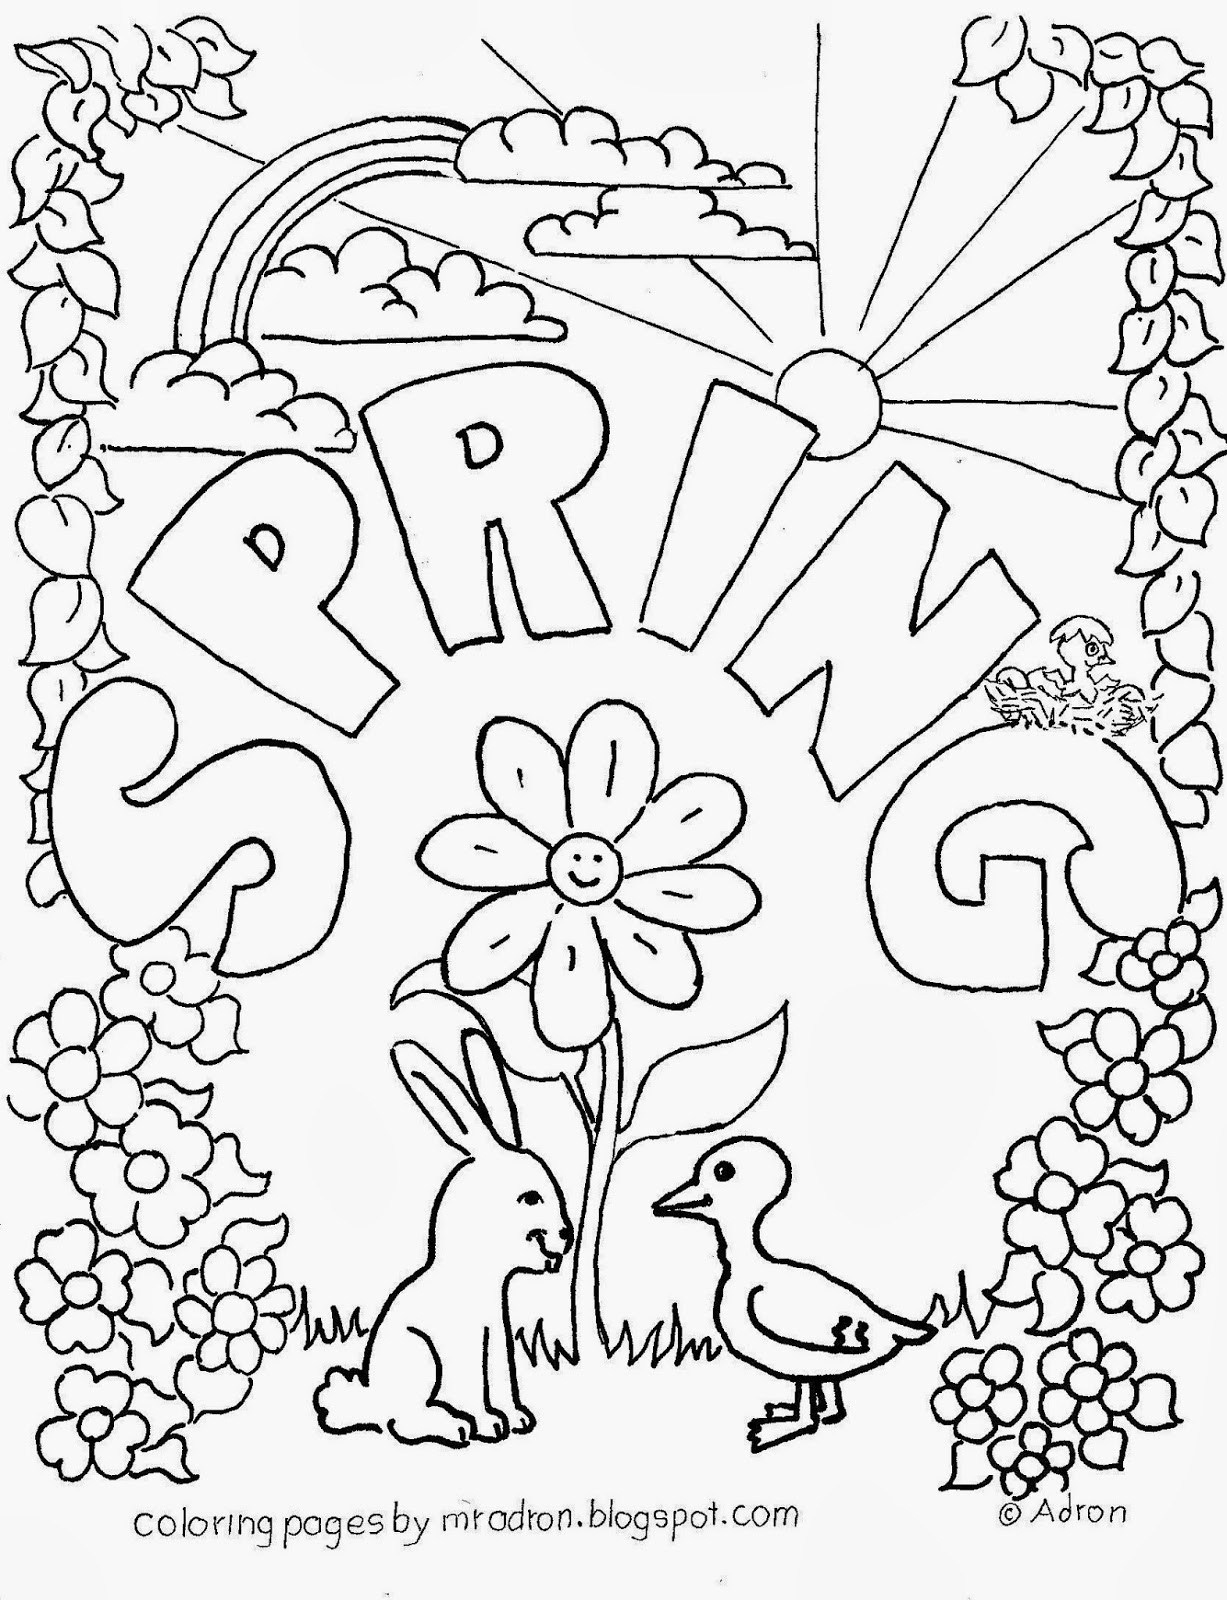 Spring Coloring Pages To Print Agreeable Springtime Coloring Pages - Free Printable Spring Coloring Pages For Adults